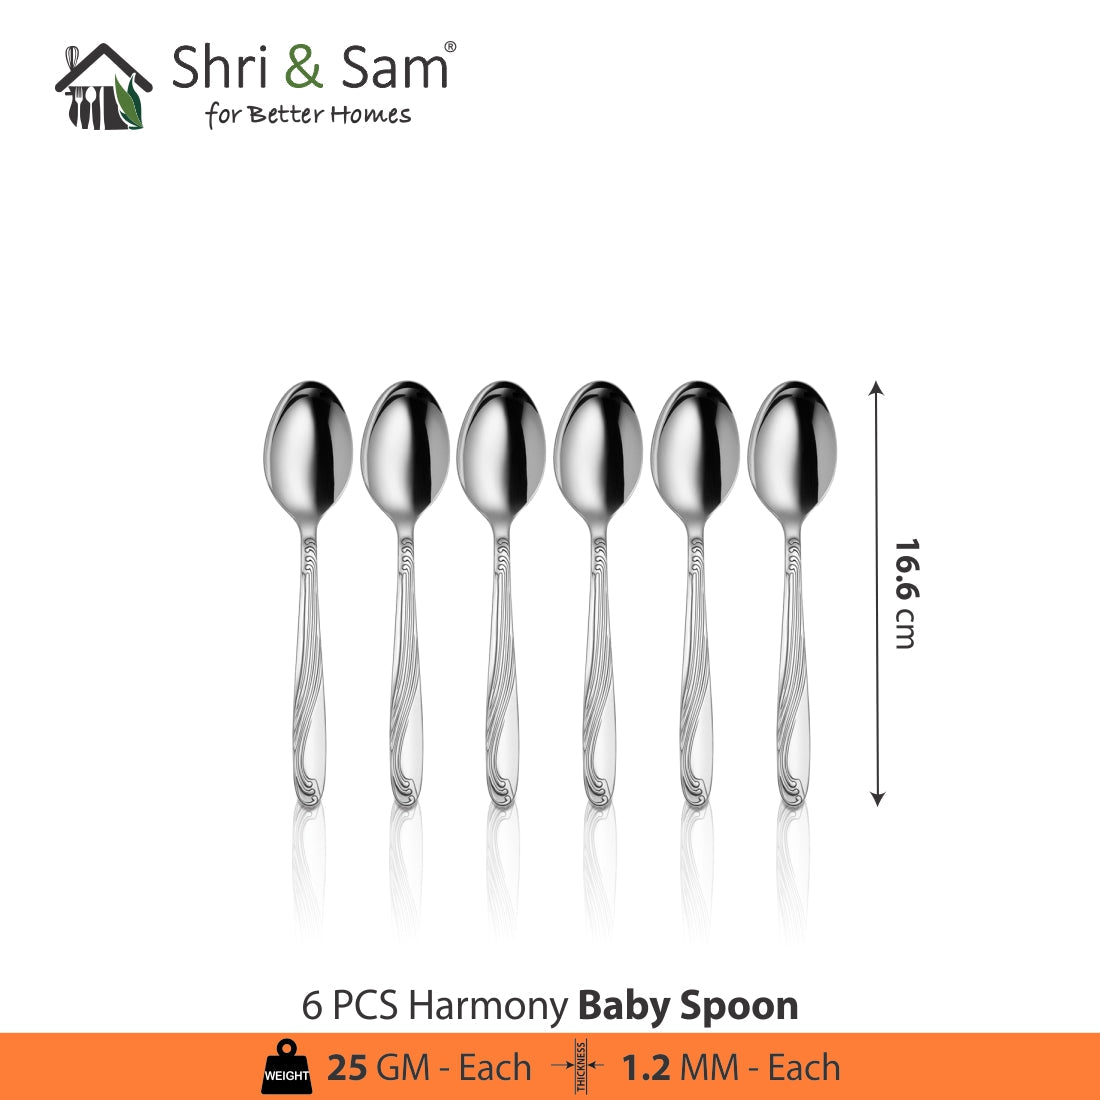 Stainless Steel Cutlery Harmony